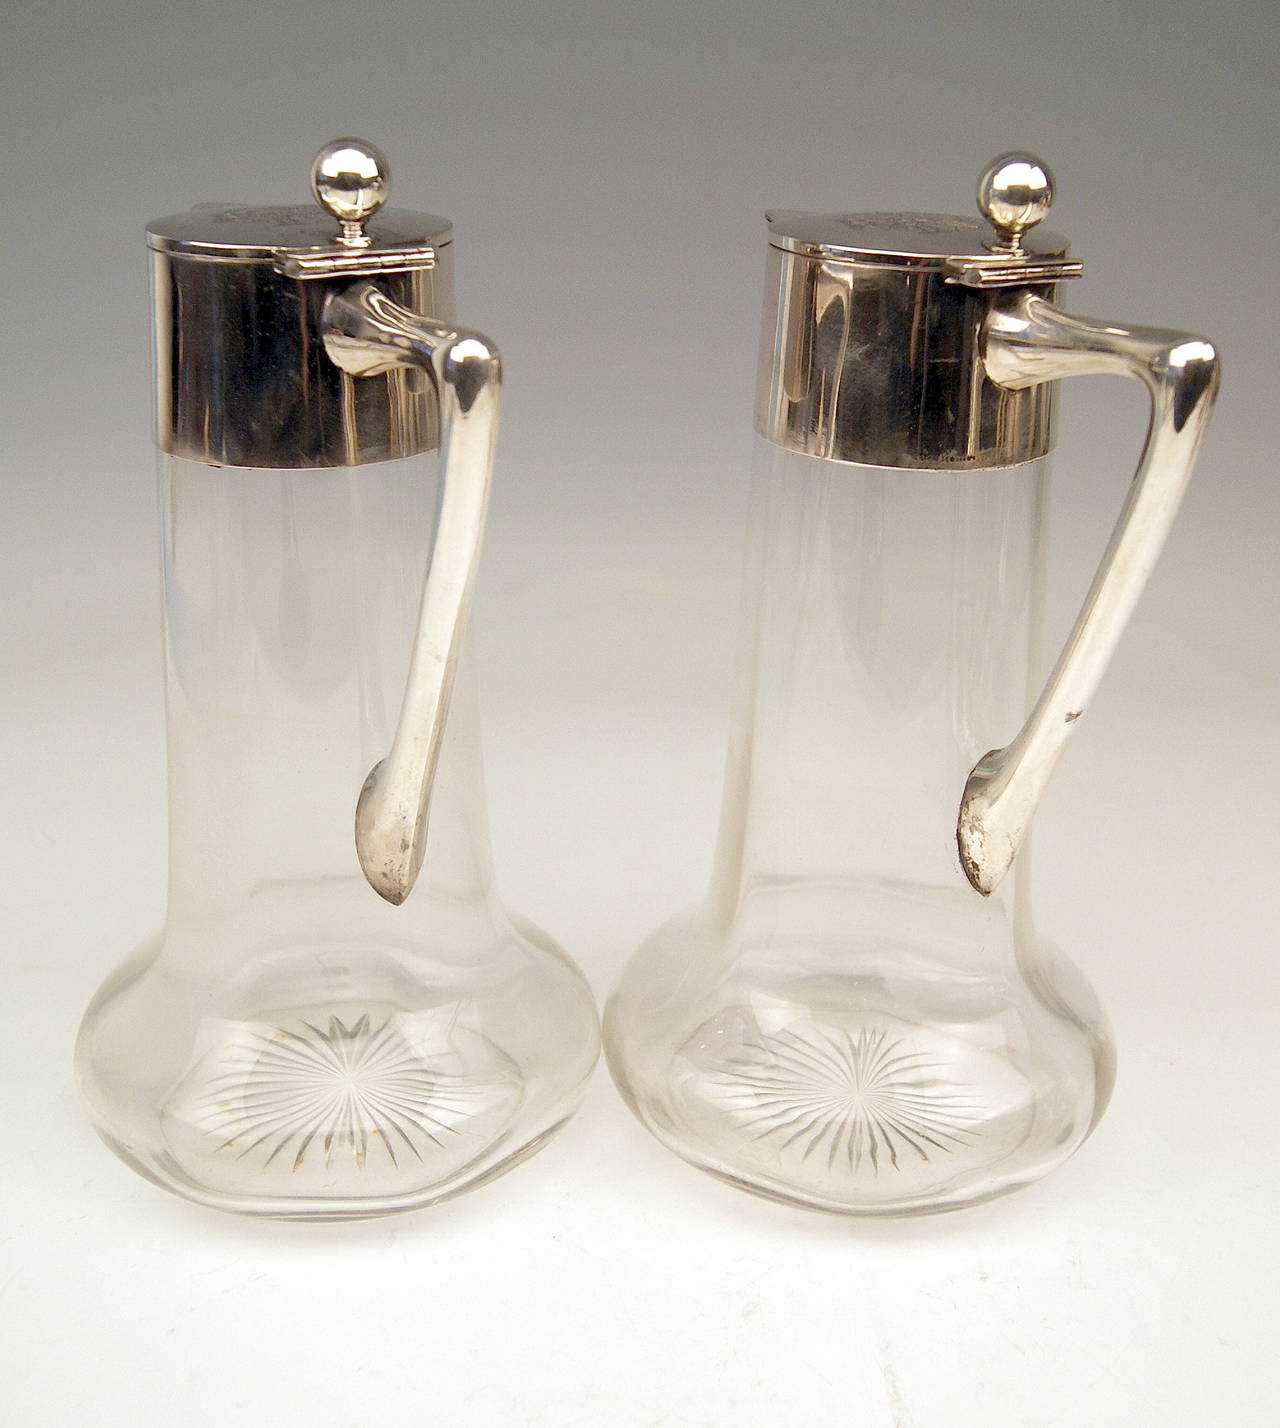 Art Nouveau German Silver Glass Decanter Carafes with Silver Mounting by W. Binder c.1900